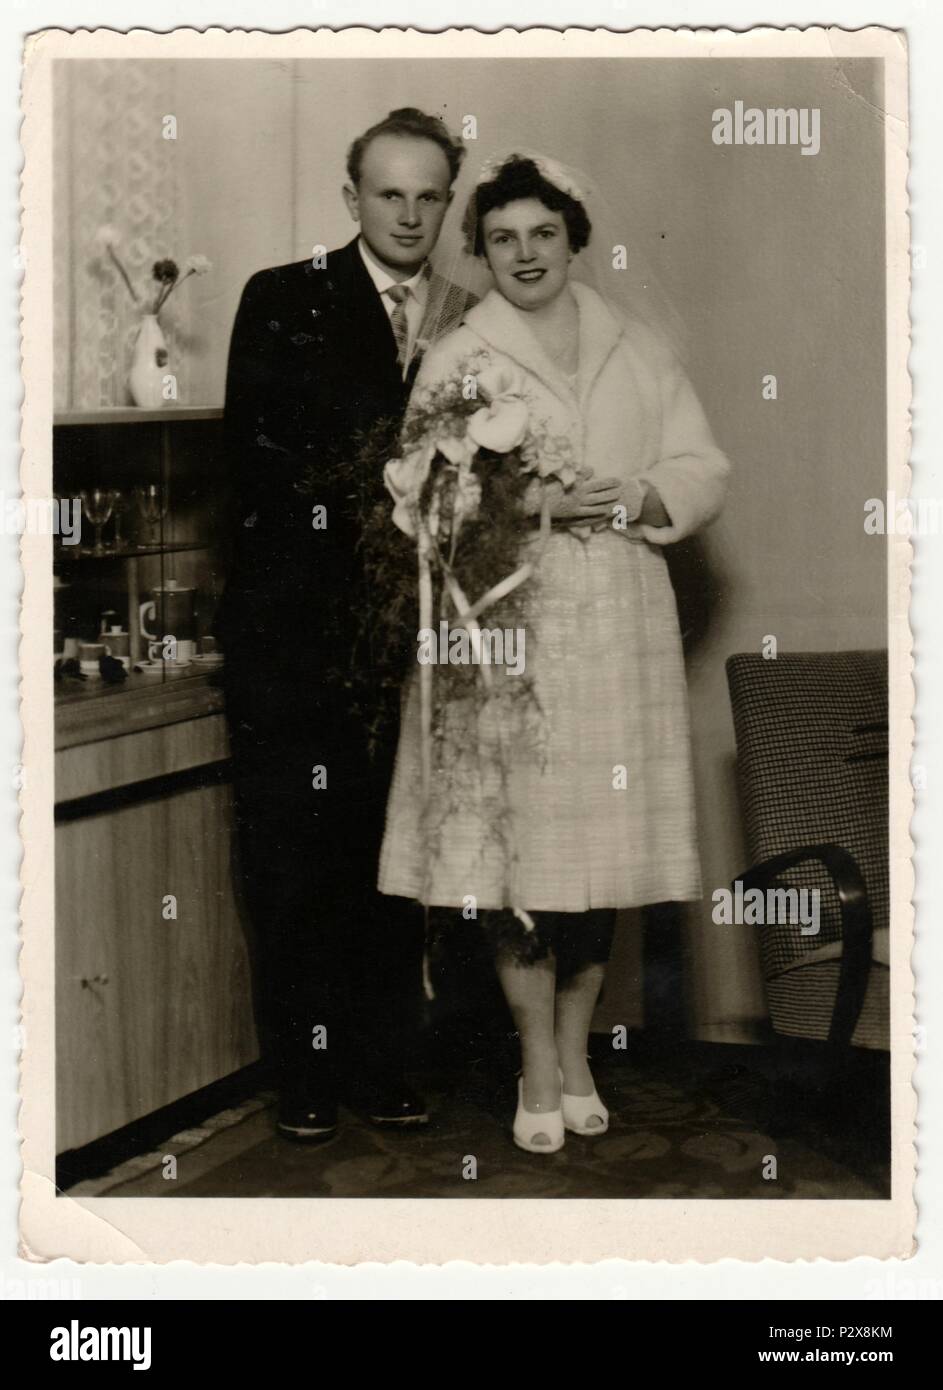 THE CZECHOSLOVAK SOCIALIST REPUBLIC - CIRCA 1960s: Vintage photo shows a bride with bridegroom. Bride wears  a soft veil and holds calla flowers (bouquet). Retro black & white  photography. Stock Photo